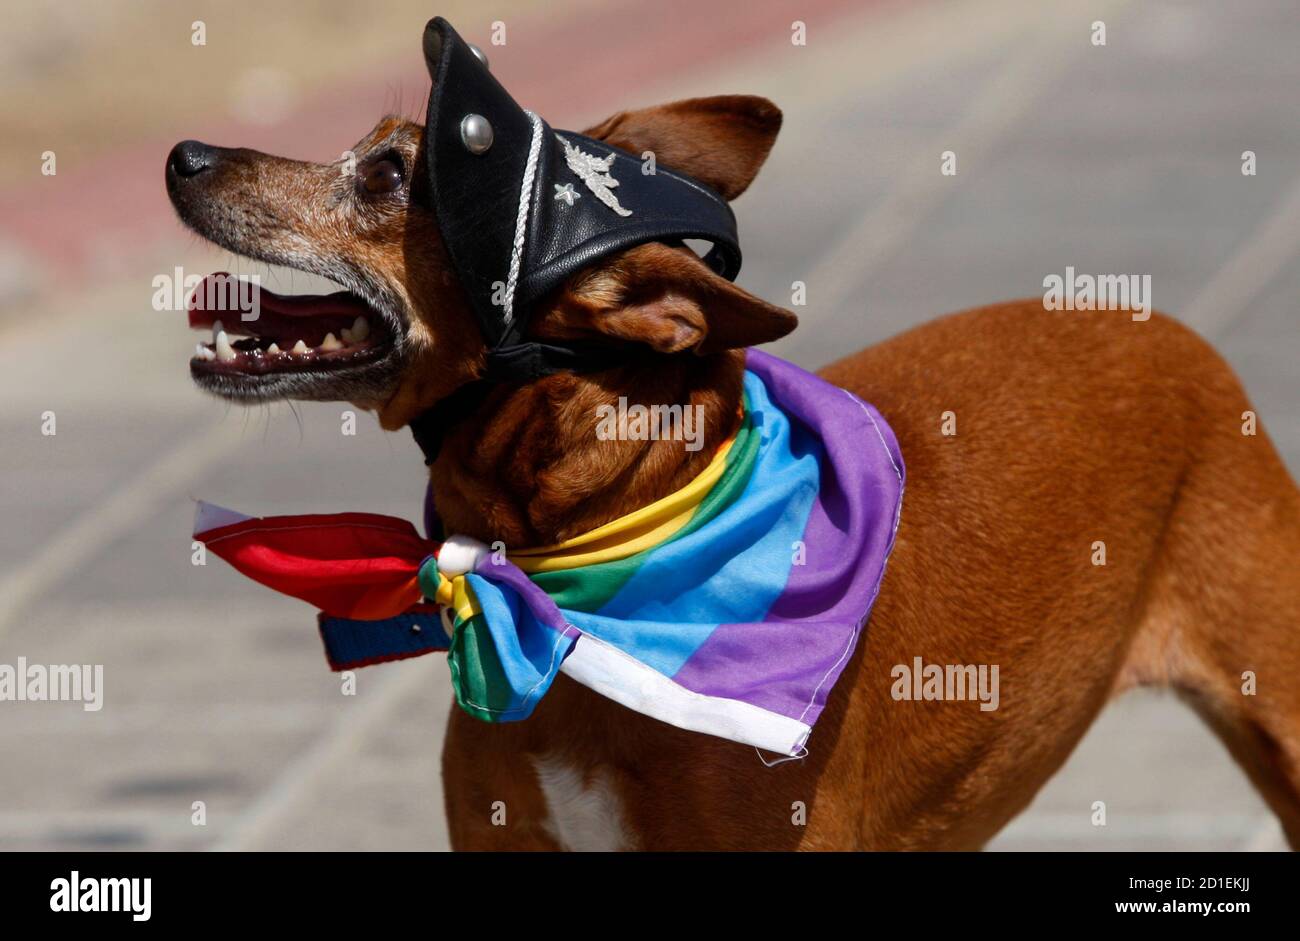 A dog has a flag of the gay community tied around its neck during the  annual gay pride parade in Tel Aviv June 11, 2010. Gays, lesbians,  transgenders and supporters of gay